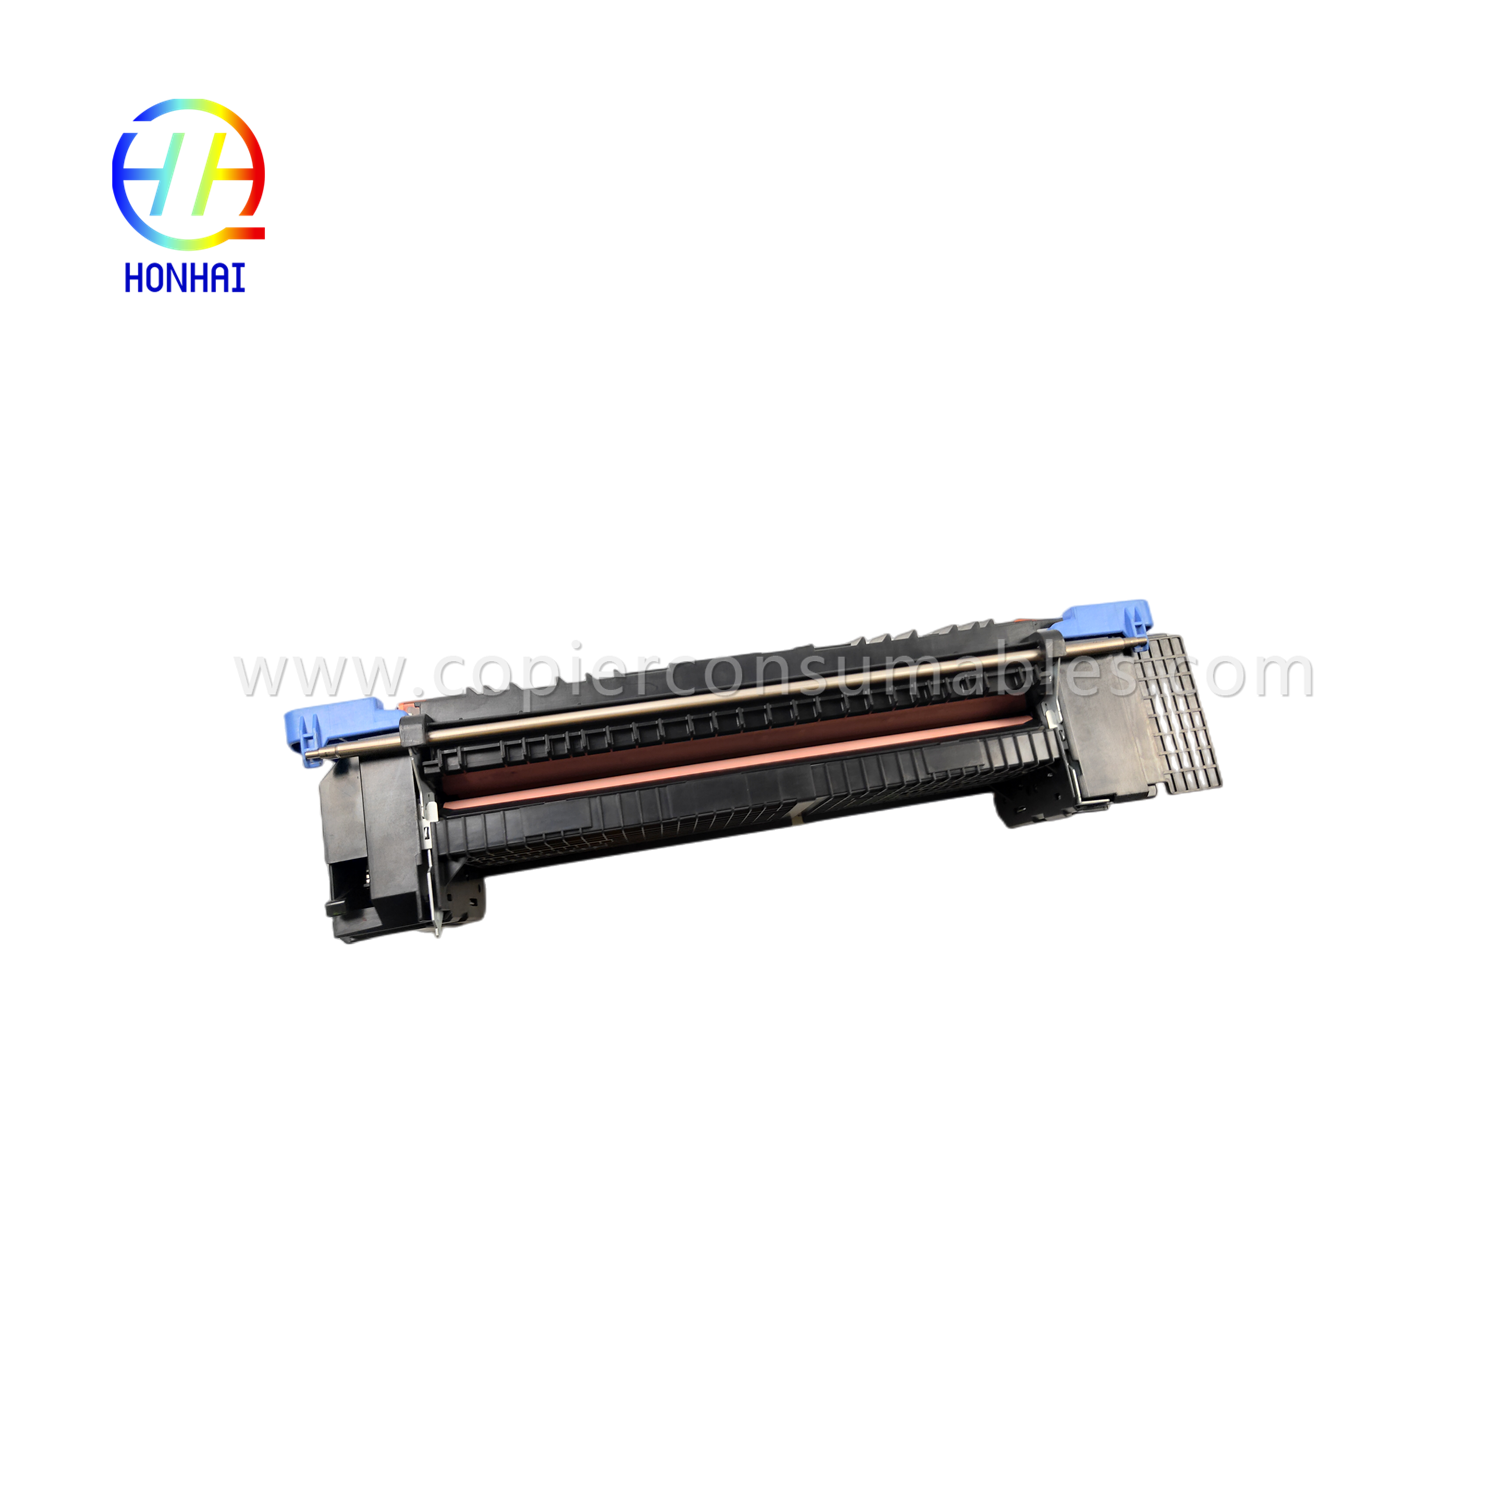 https://www.copierconsumables.com/fuser-assembly-unit-for-hp-m855-m880-m855dn-m855xh-m880z-m880z-c1n54-67901-c1n58-67901-fusing-heating-fixing/assy